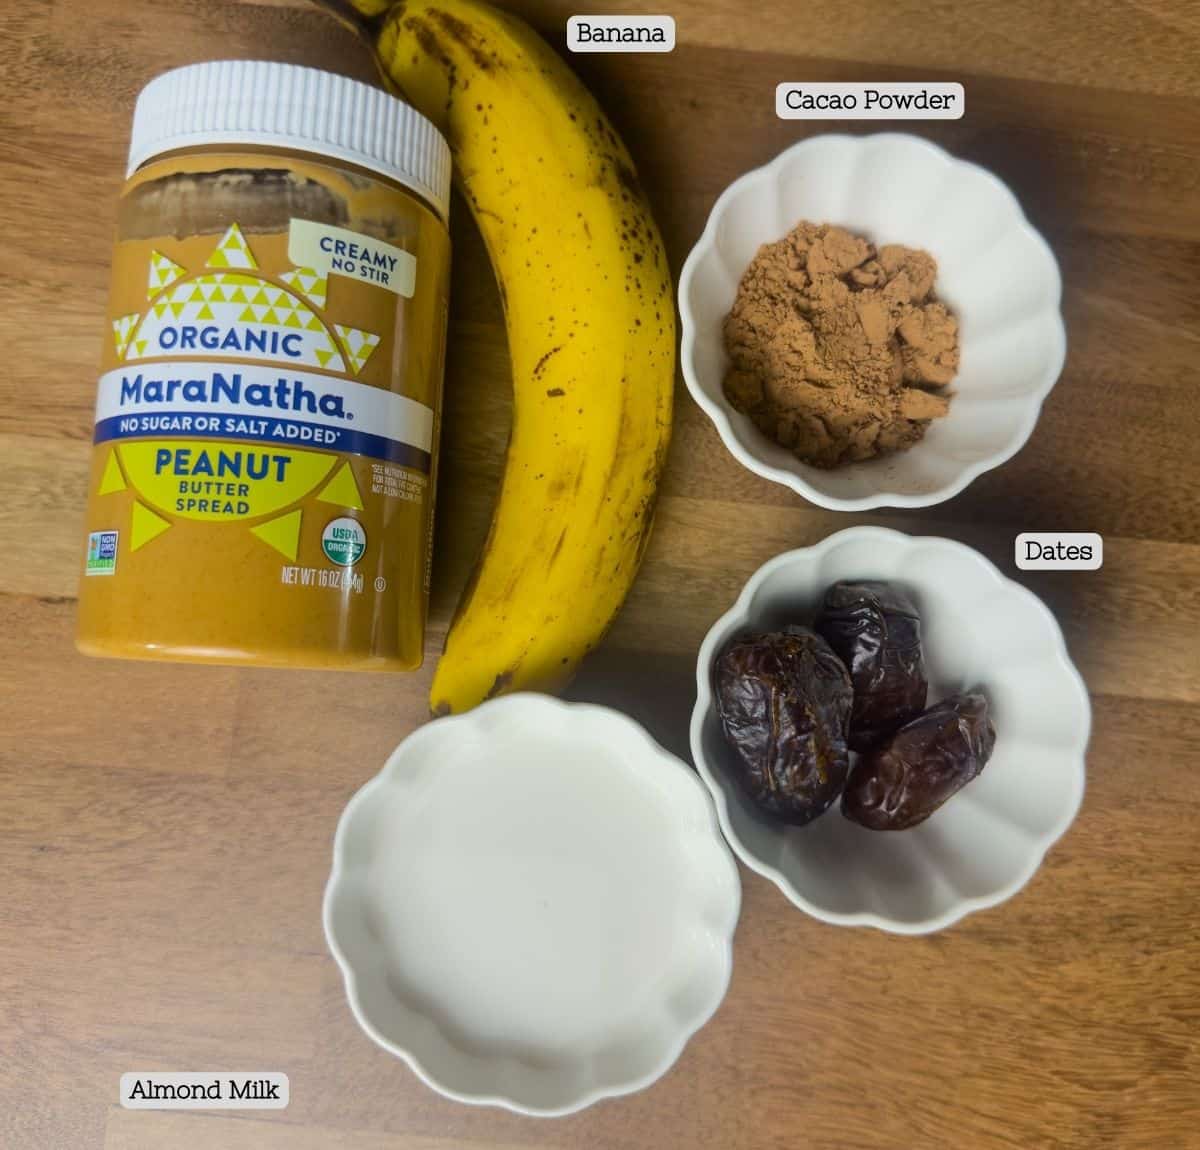 Ingredients for a Tropical Smoothie Peanut Butter Cup neatly laid out, including a banana, cacao powder, Medjool dates, and almond milk with peanut butter in the backdrop.